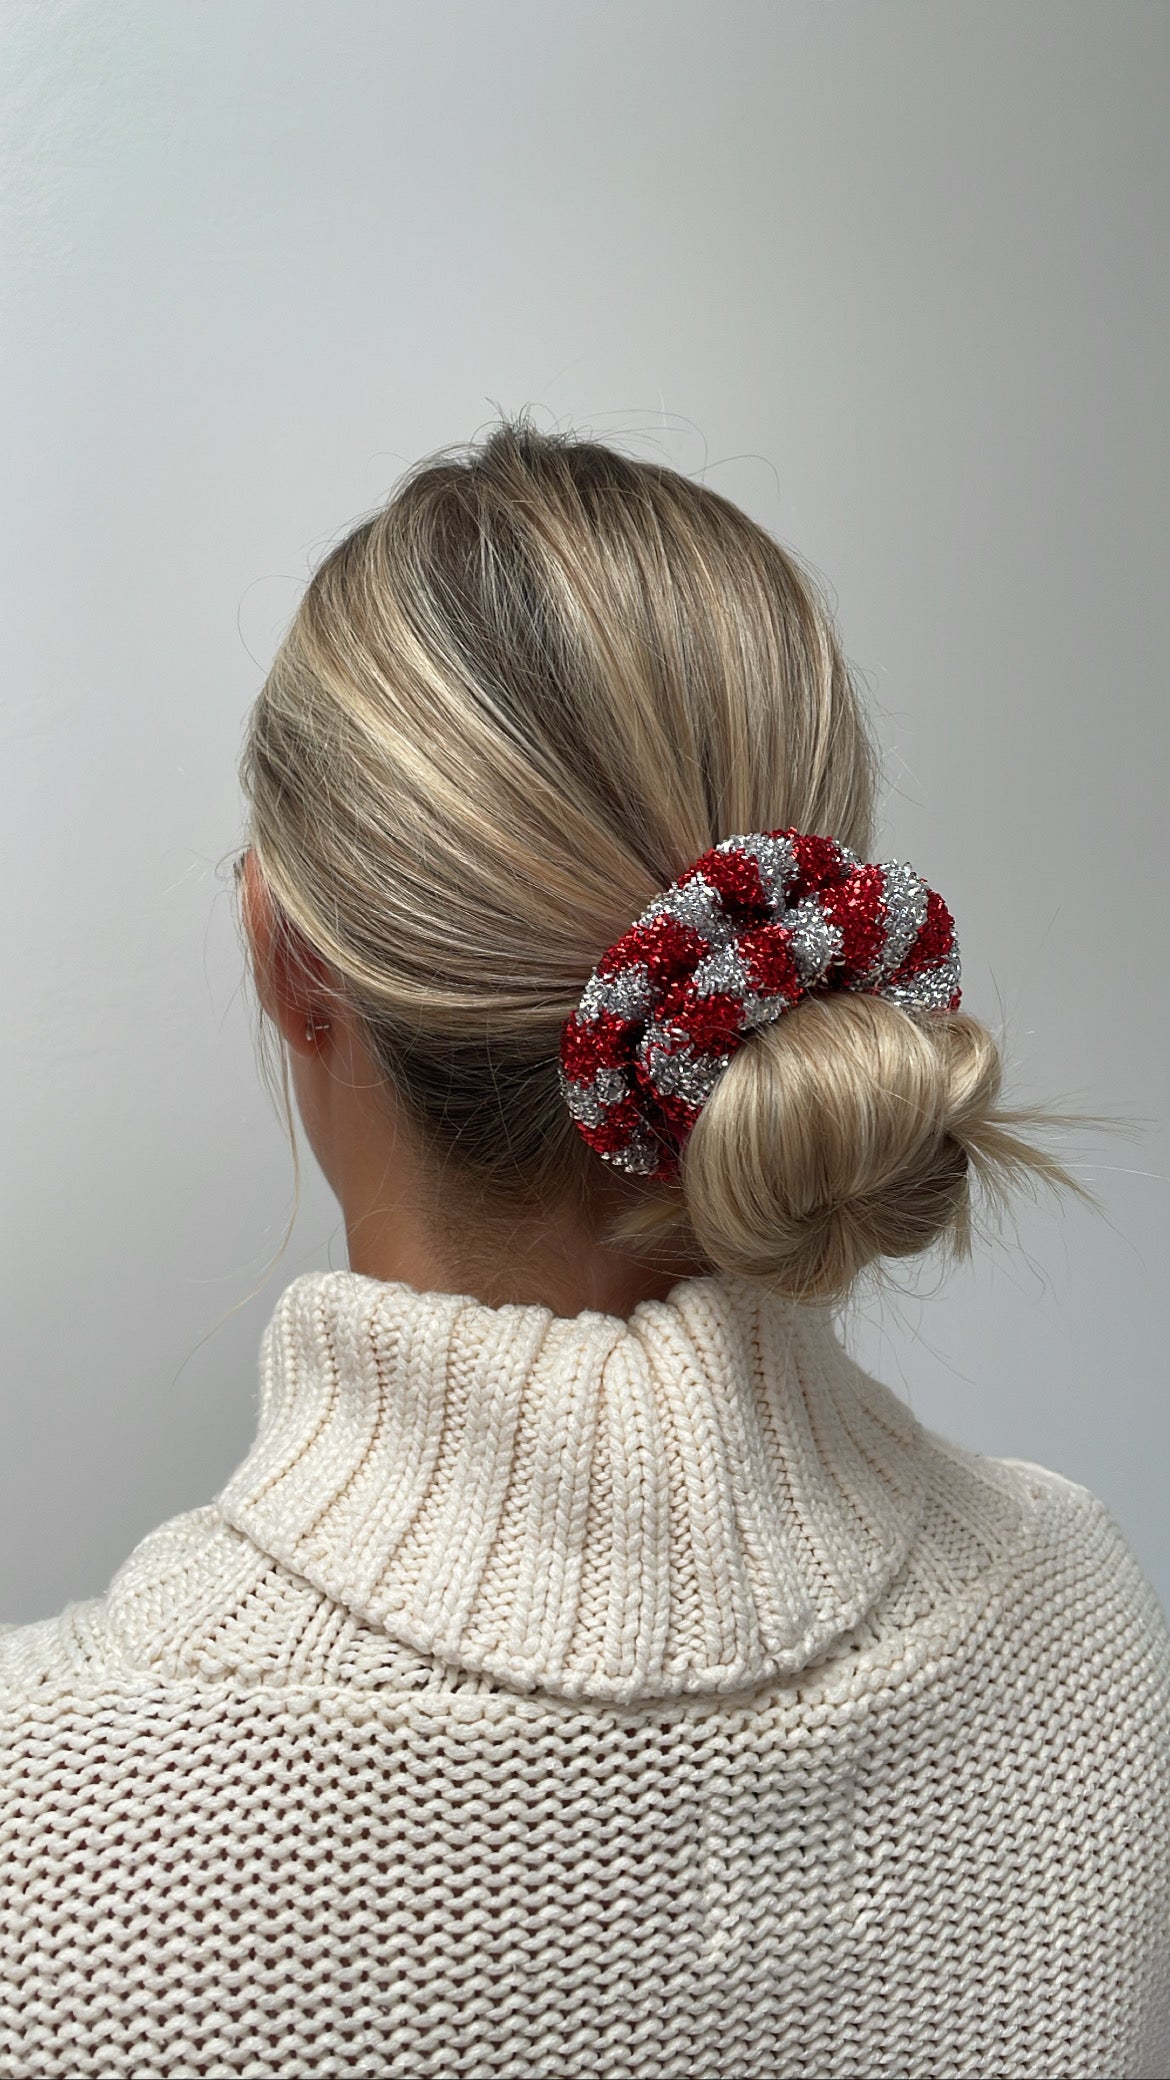 FINLAND RED AND SILVER SCRUNCHIE